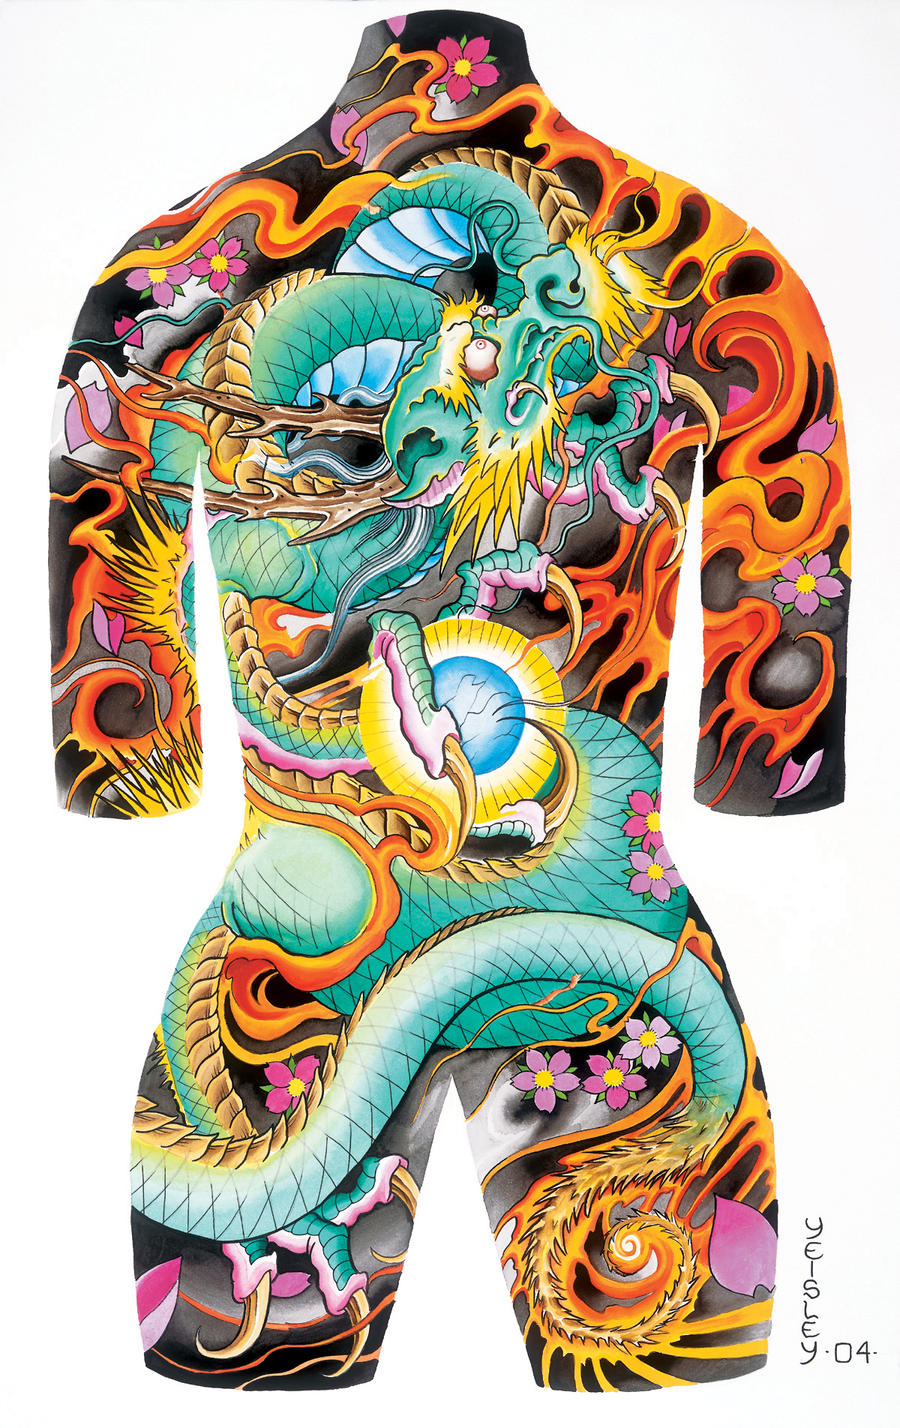 Tattoo Body Suit Poster 002 by azmousejockey on DeviantArt